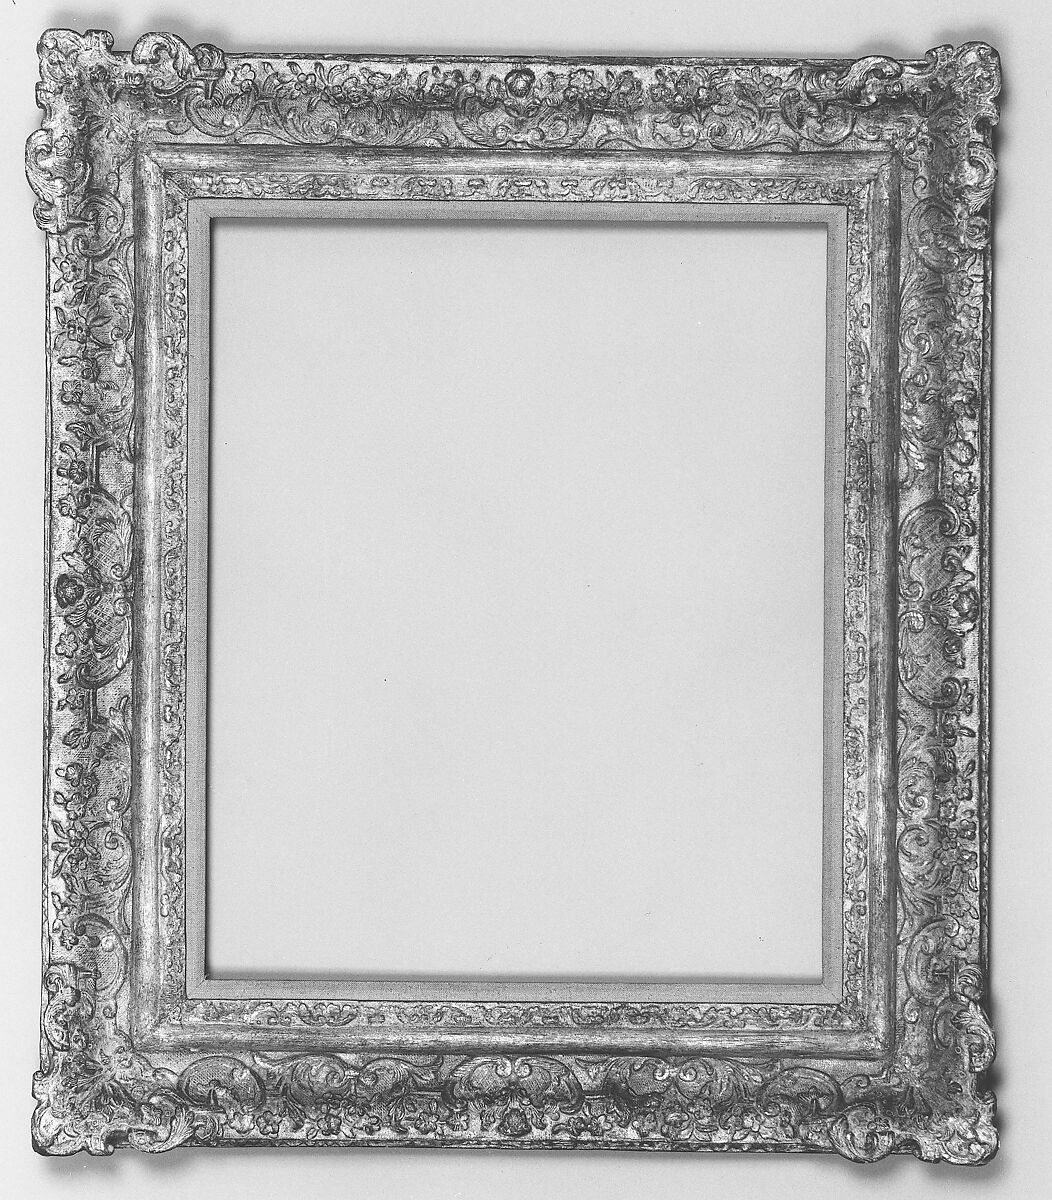 Louis XV Regency style frame, Carved and gilded wood., French 